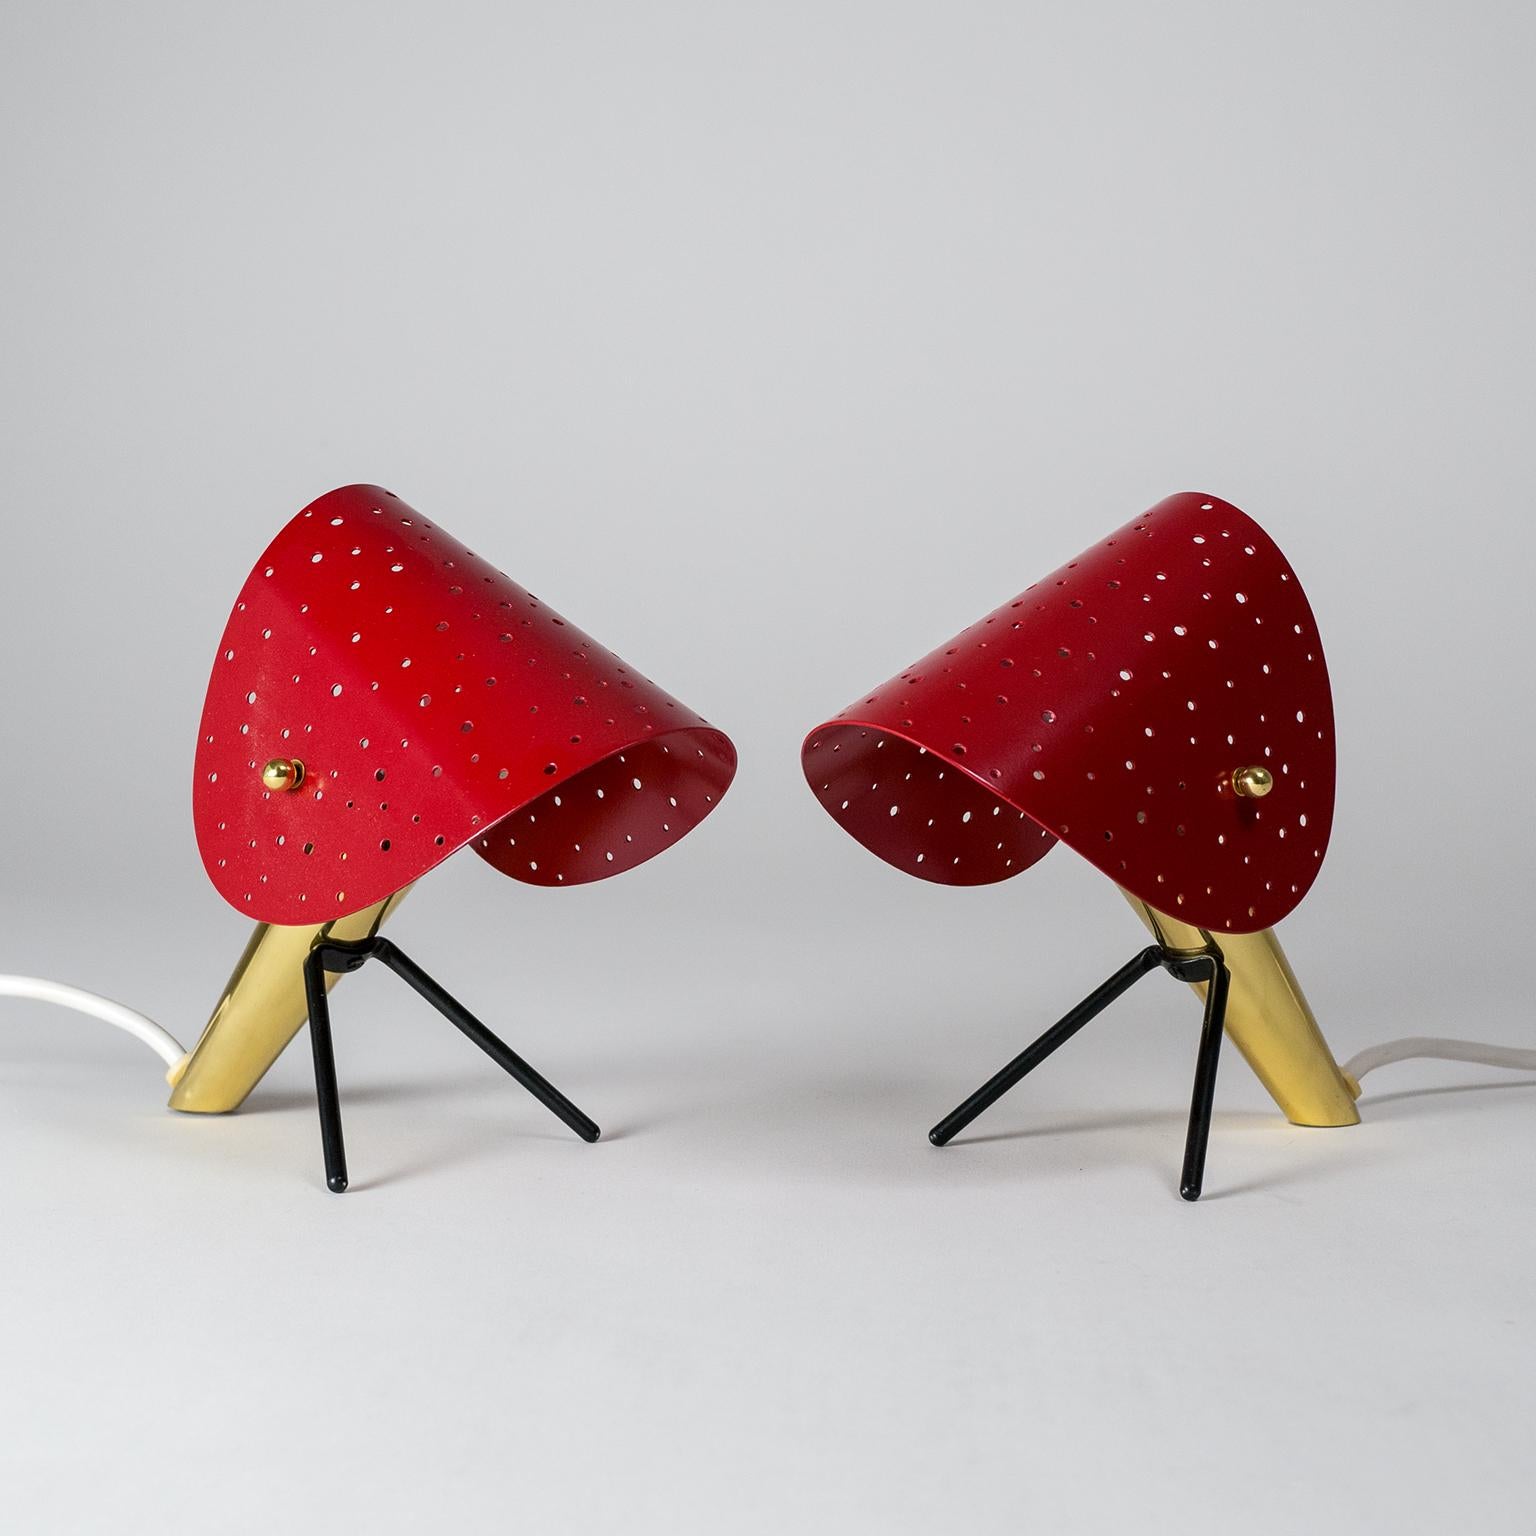 Pair of Brass Table Lamps with Perforated Shades by Ernest Igl, 1950s (Deutsch)